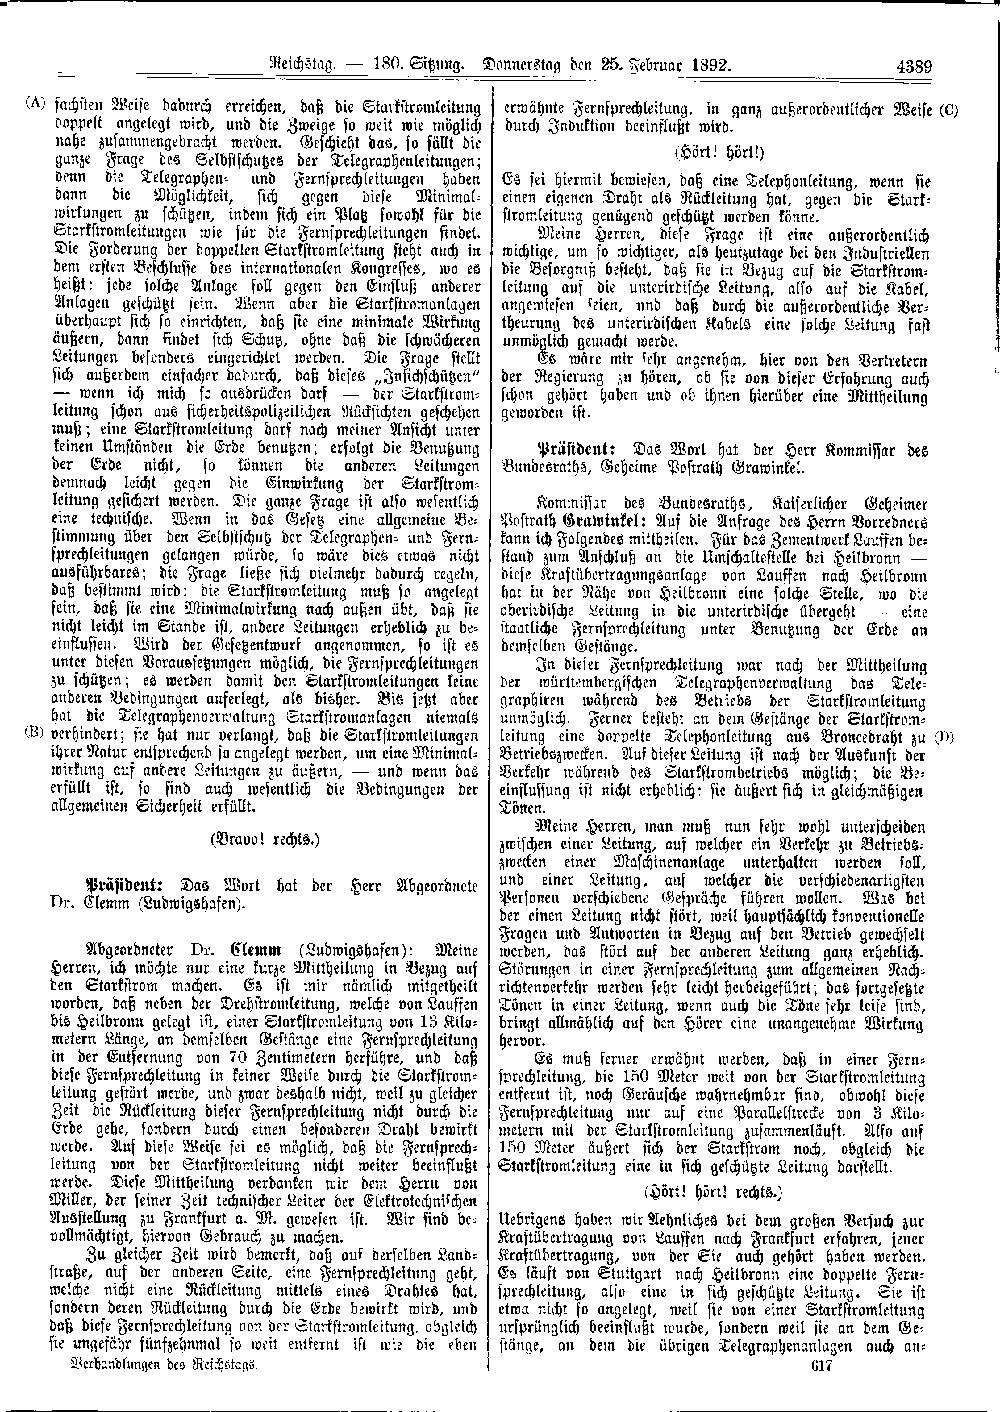 Scan of page 4389